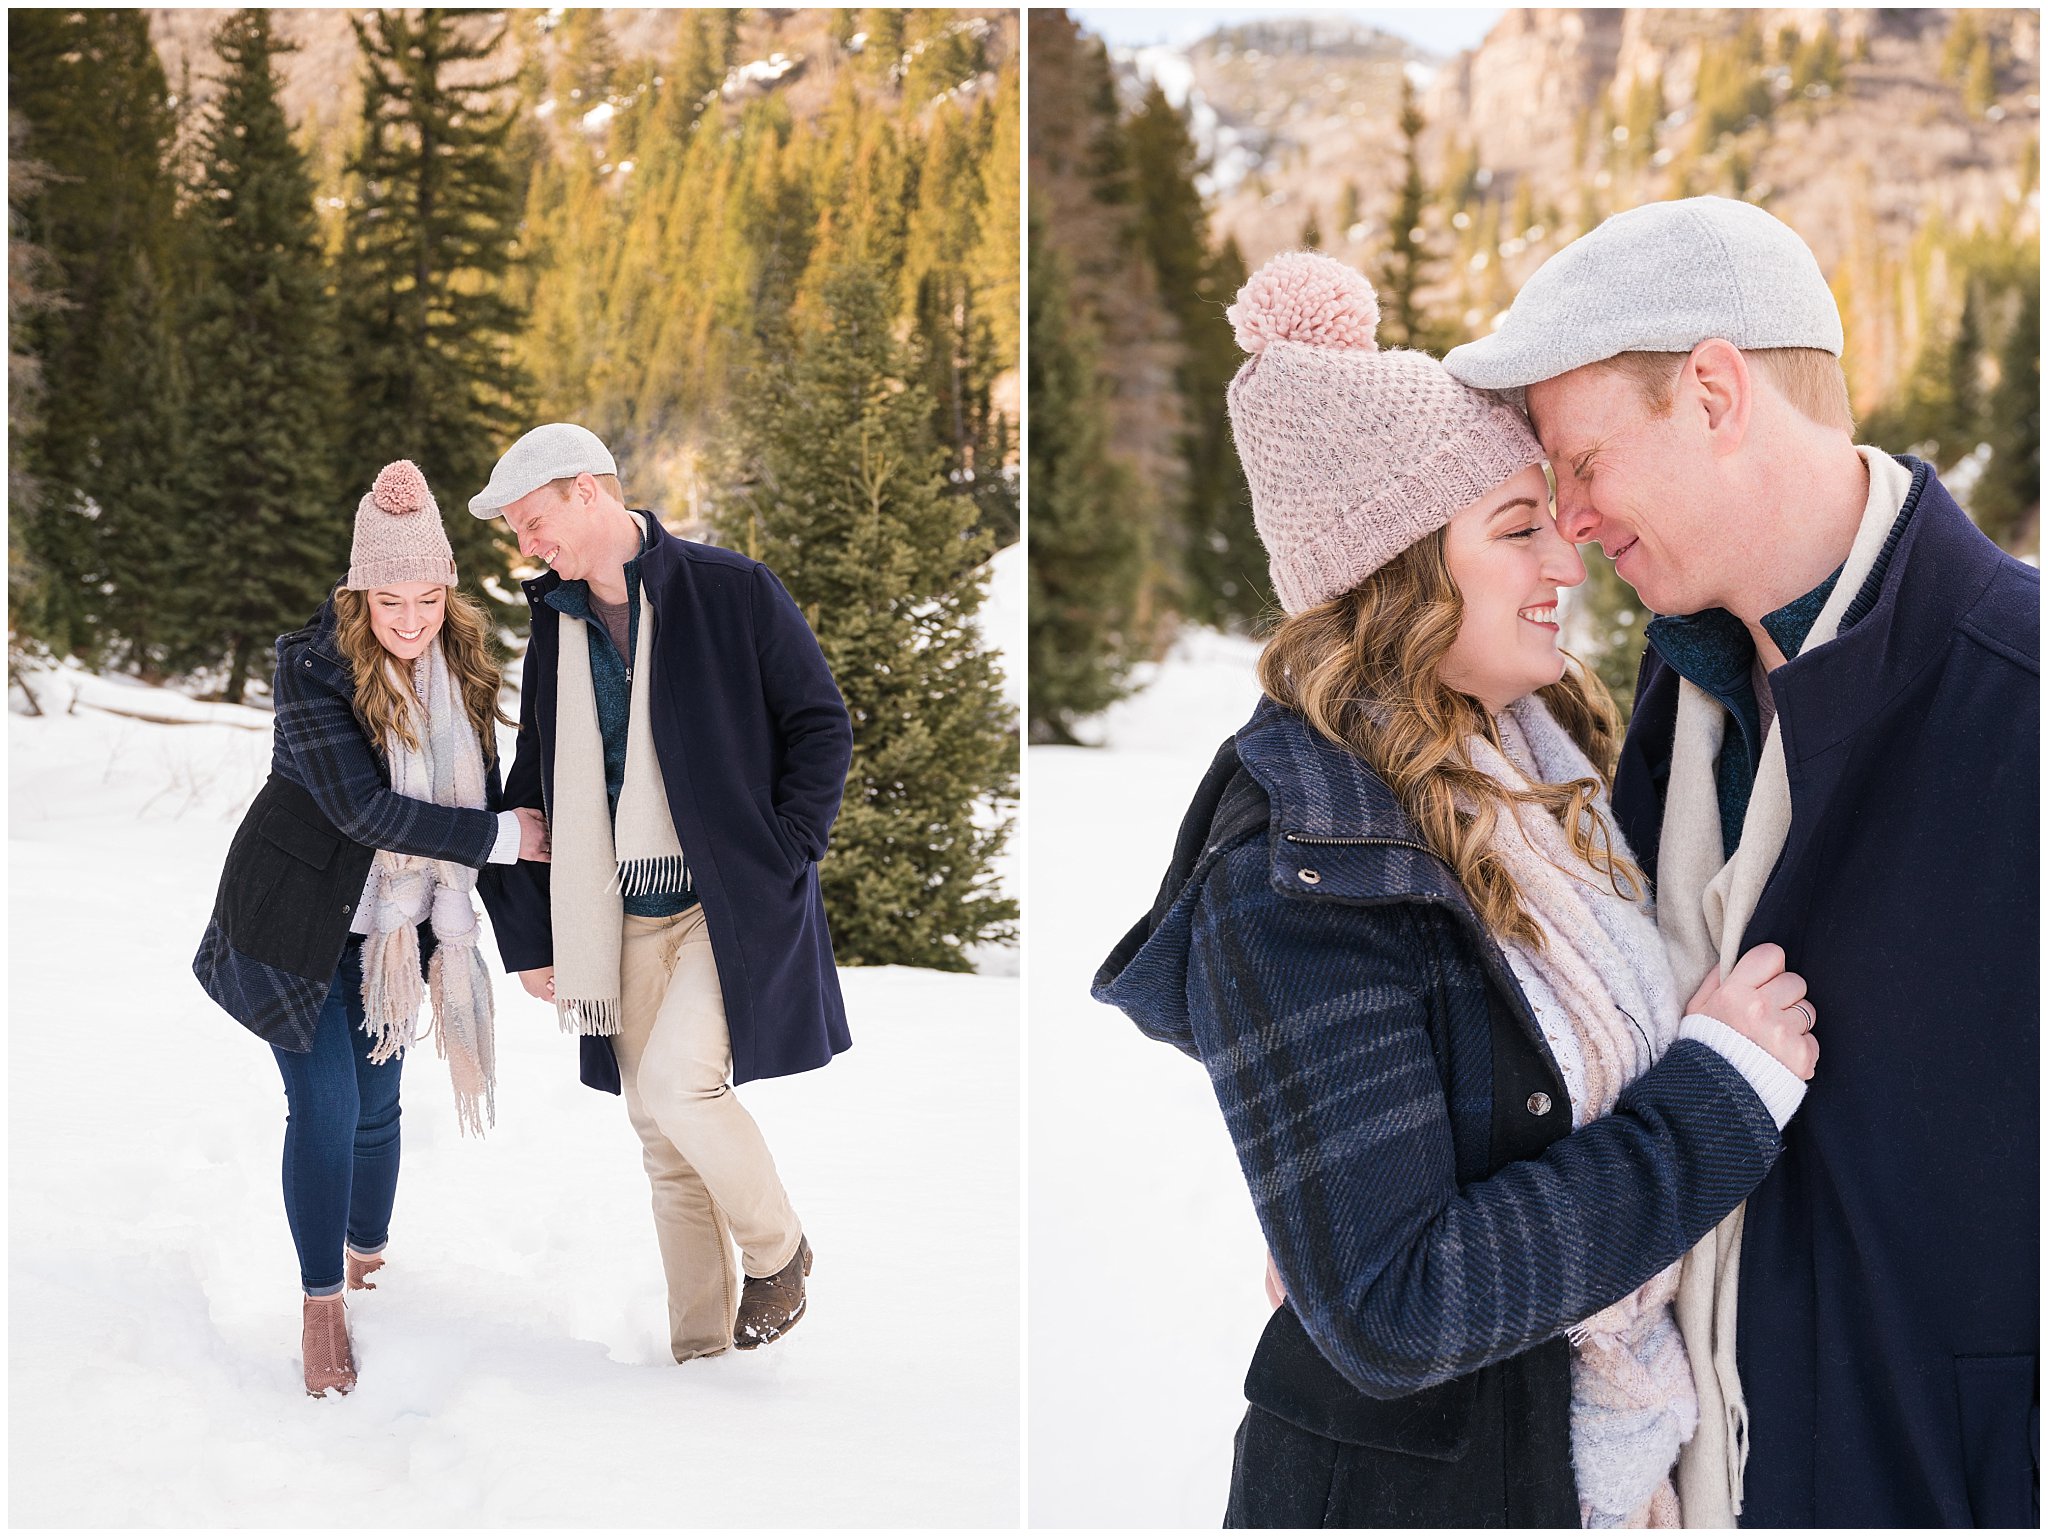 Couple in cute winter outfits sharing candid moments in the Utah mountains in the snow | Big Cottonwood Canyon Winter Engagement Session | Jessie and Dallin Photography